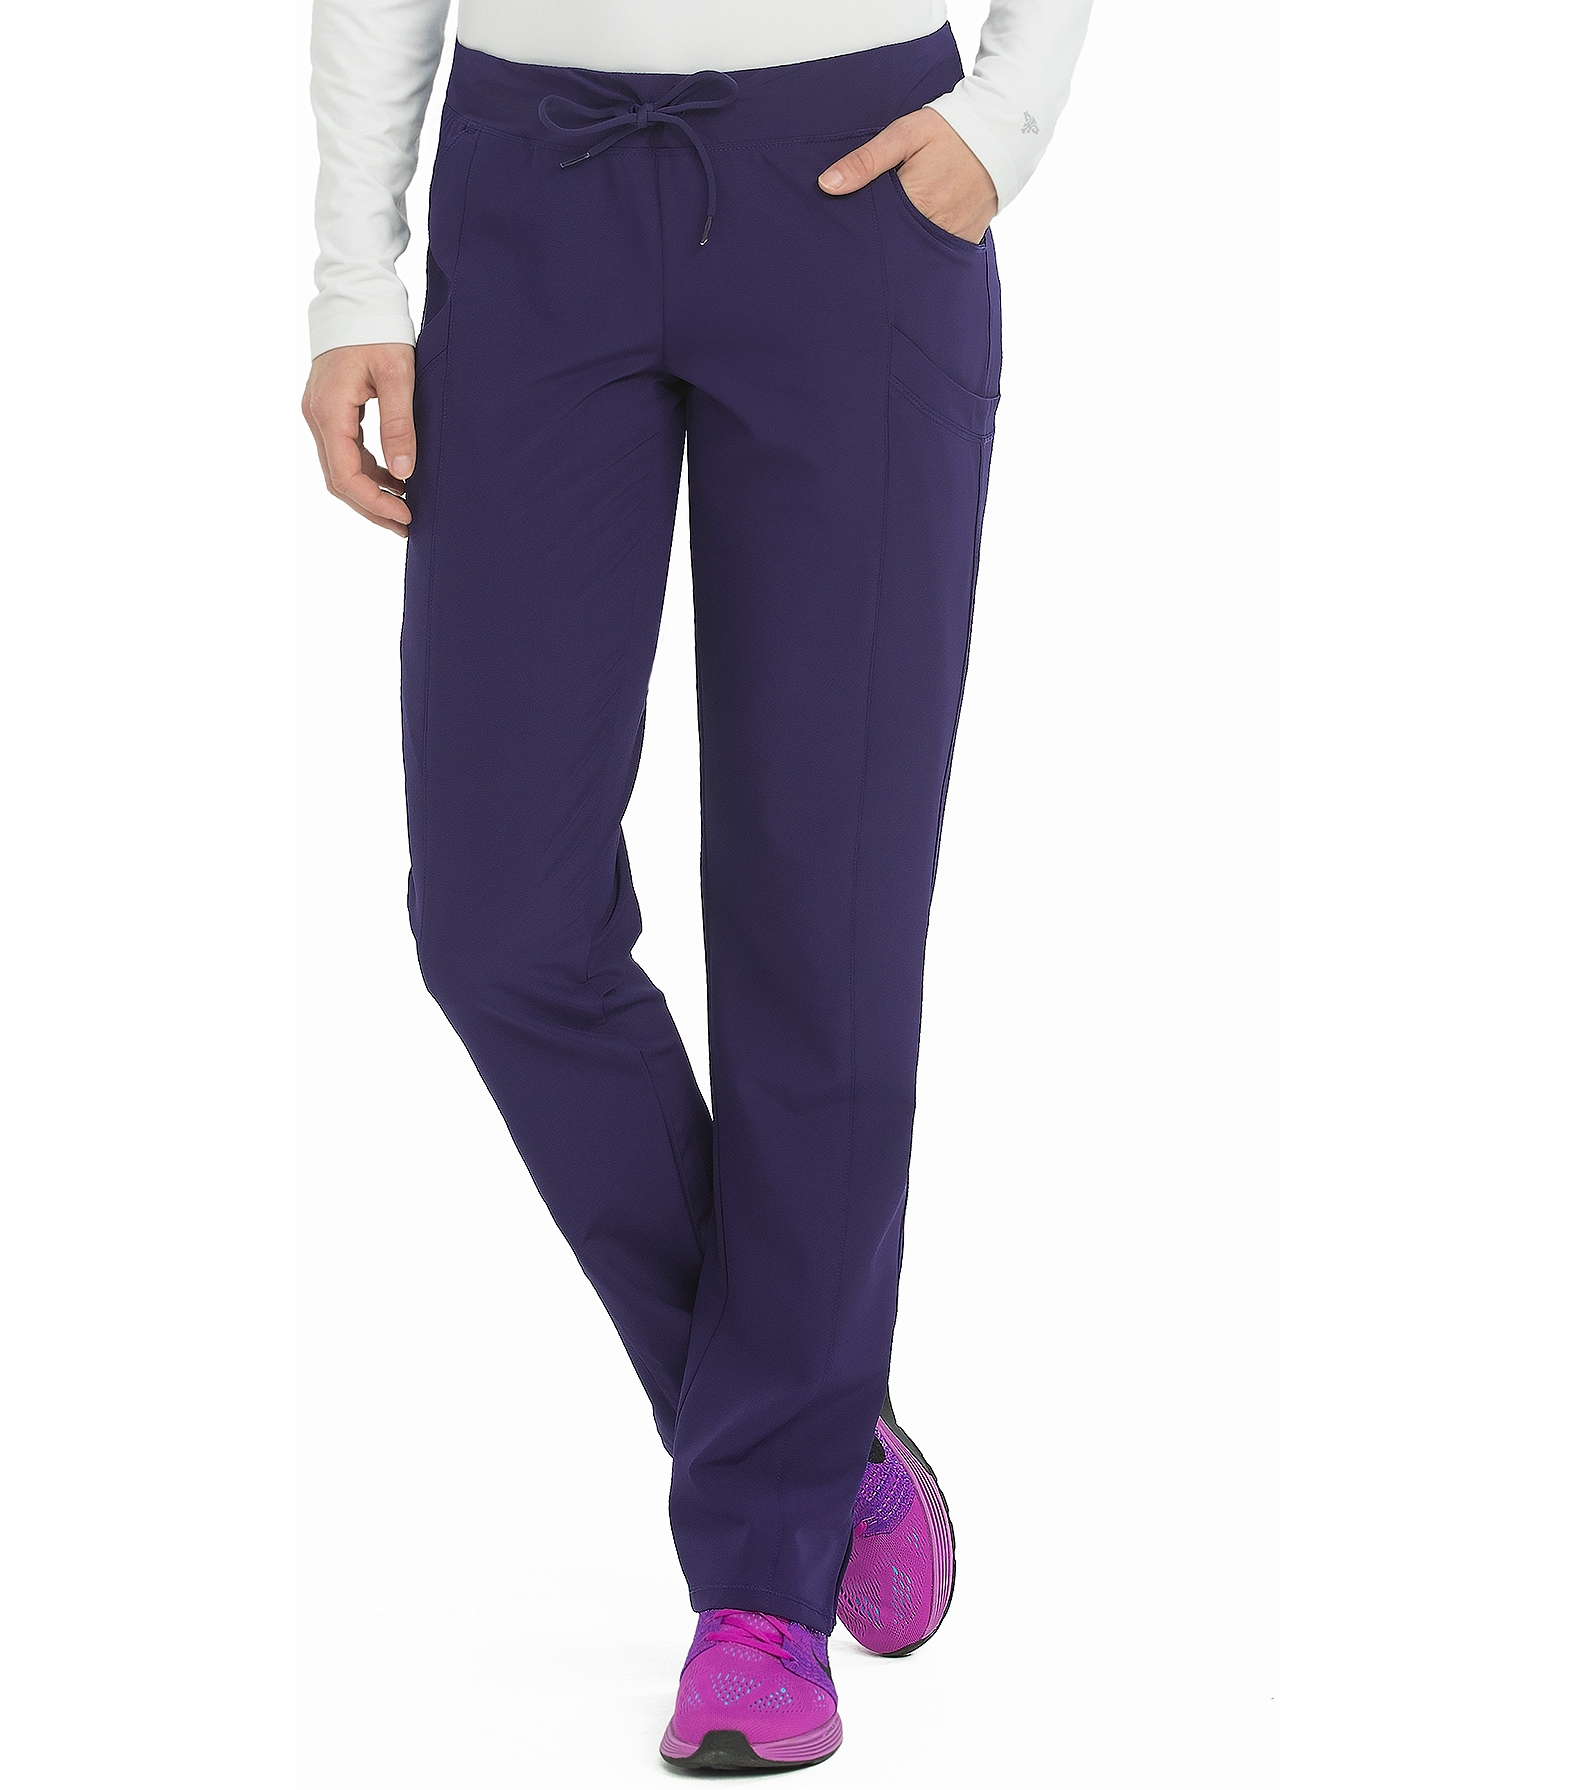 Med Couture Women's 'Activate' Transformer Scrub Pant 